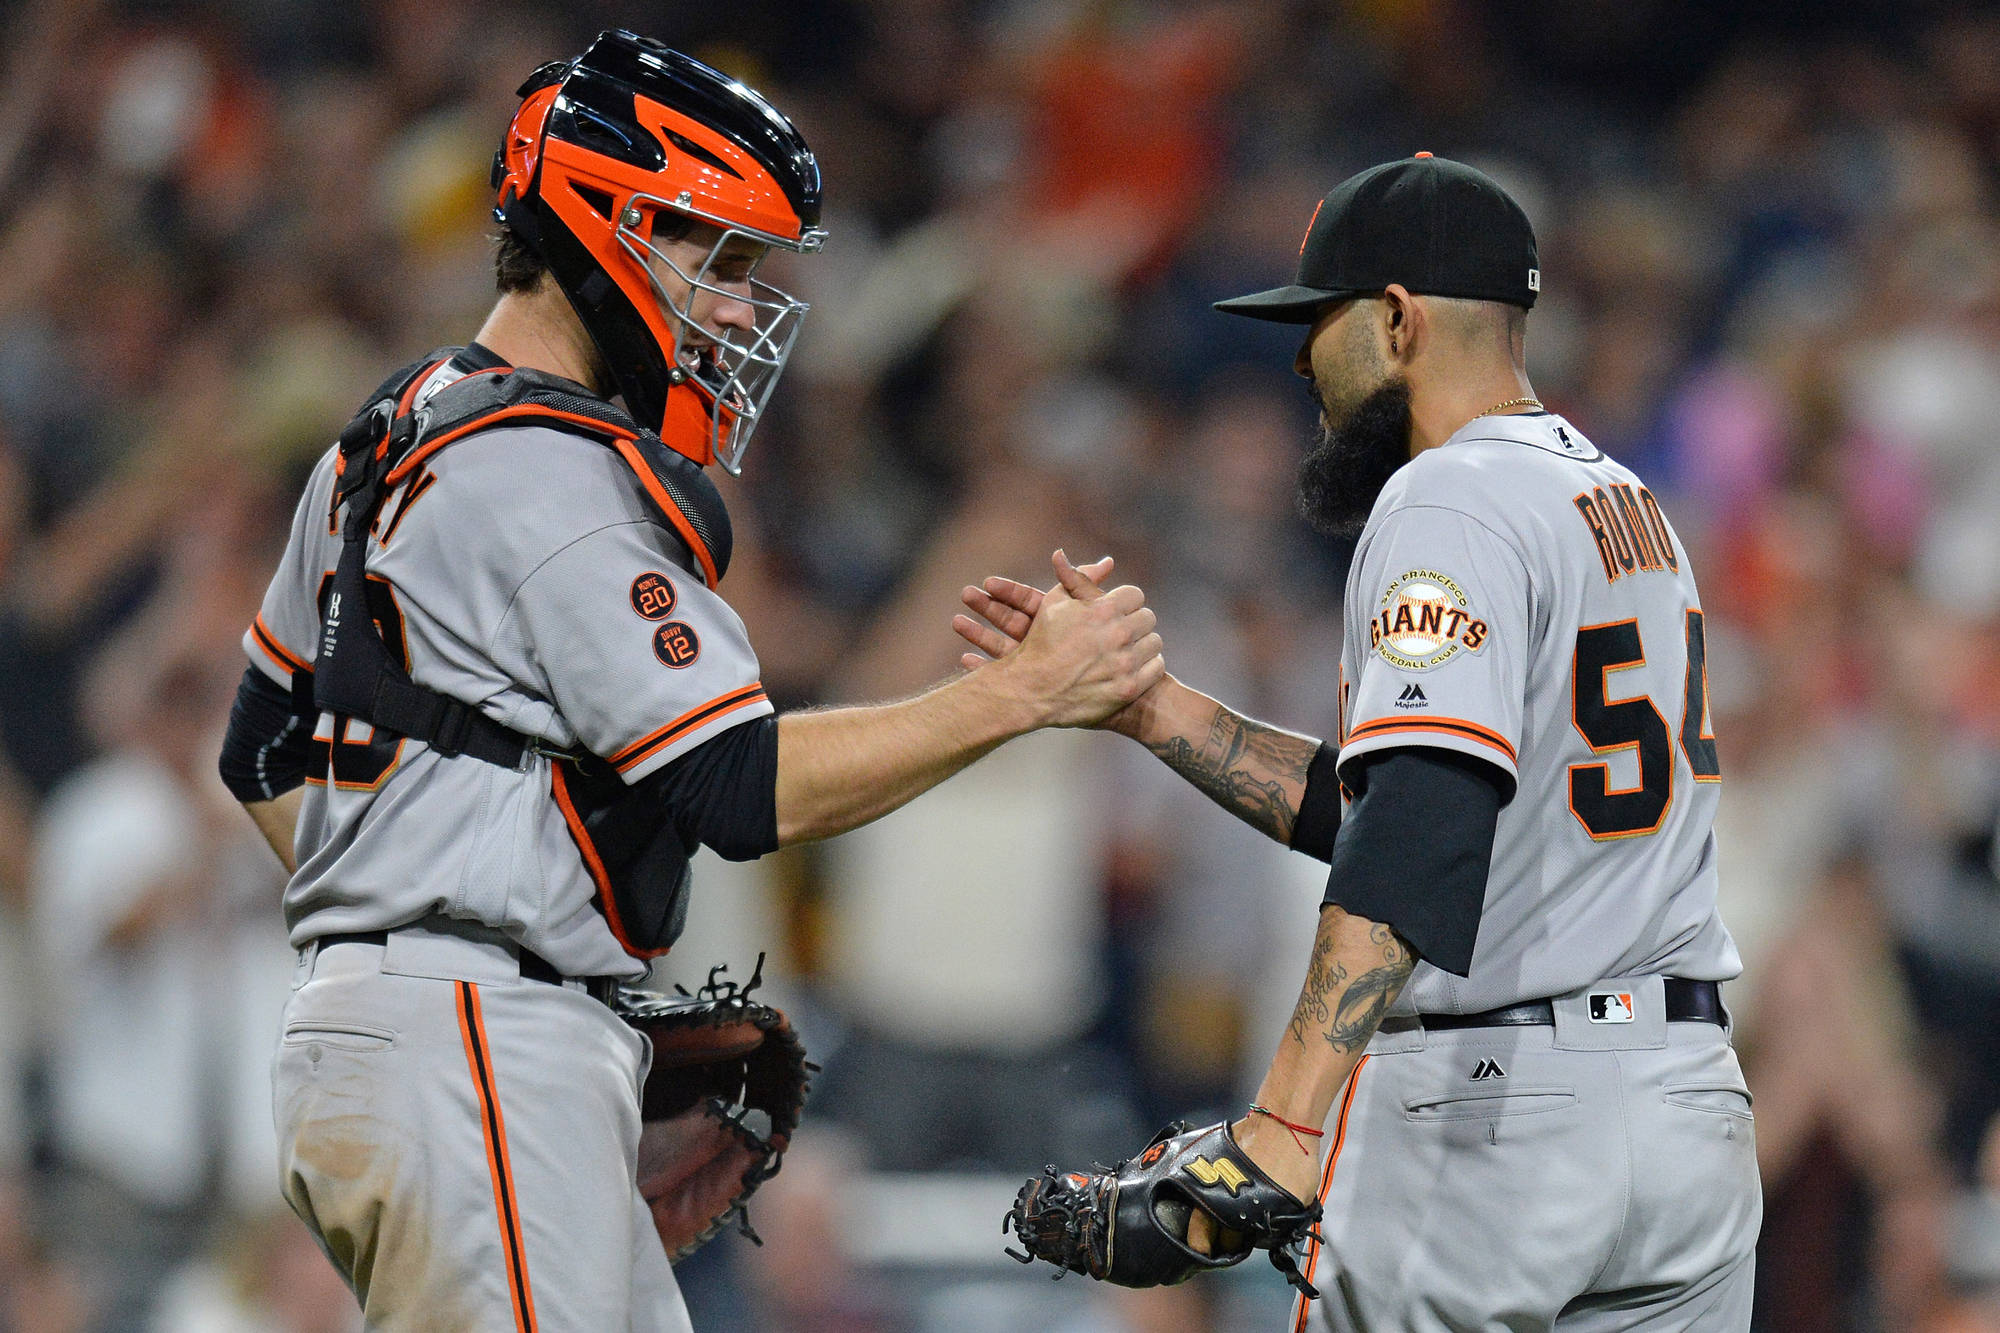 What Happened To the San Francisco Giants?